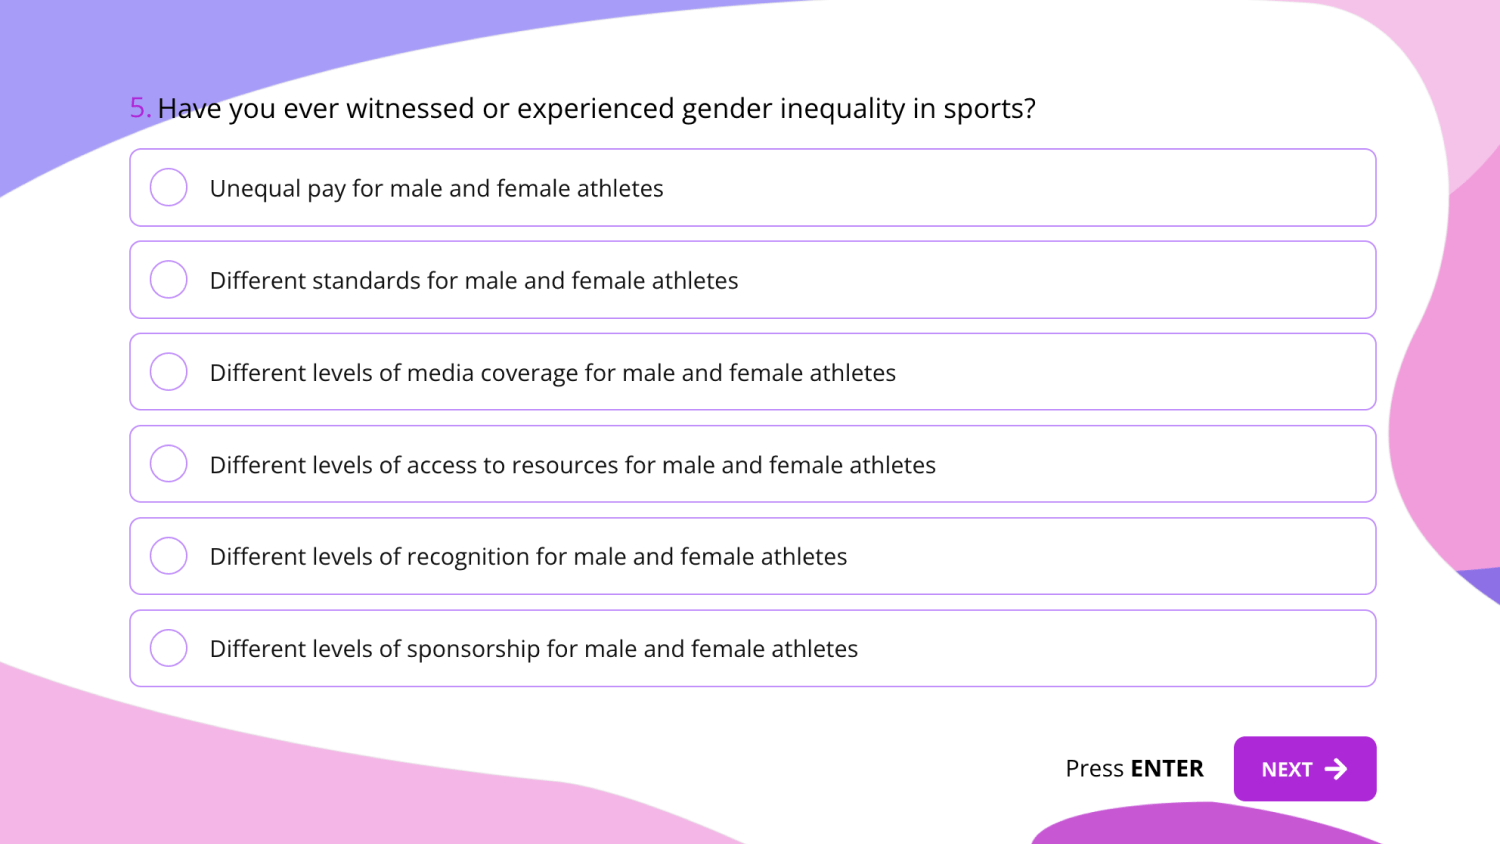 research questions about high school sports